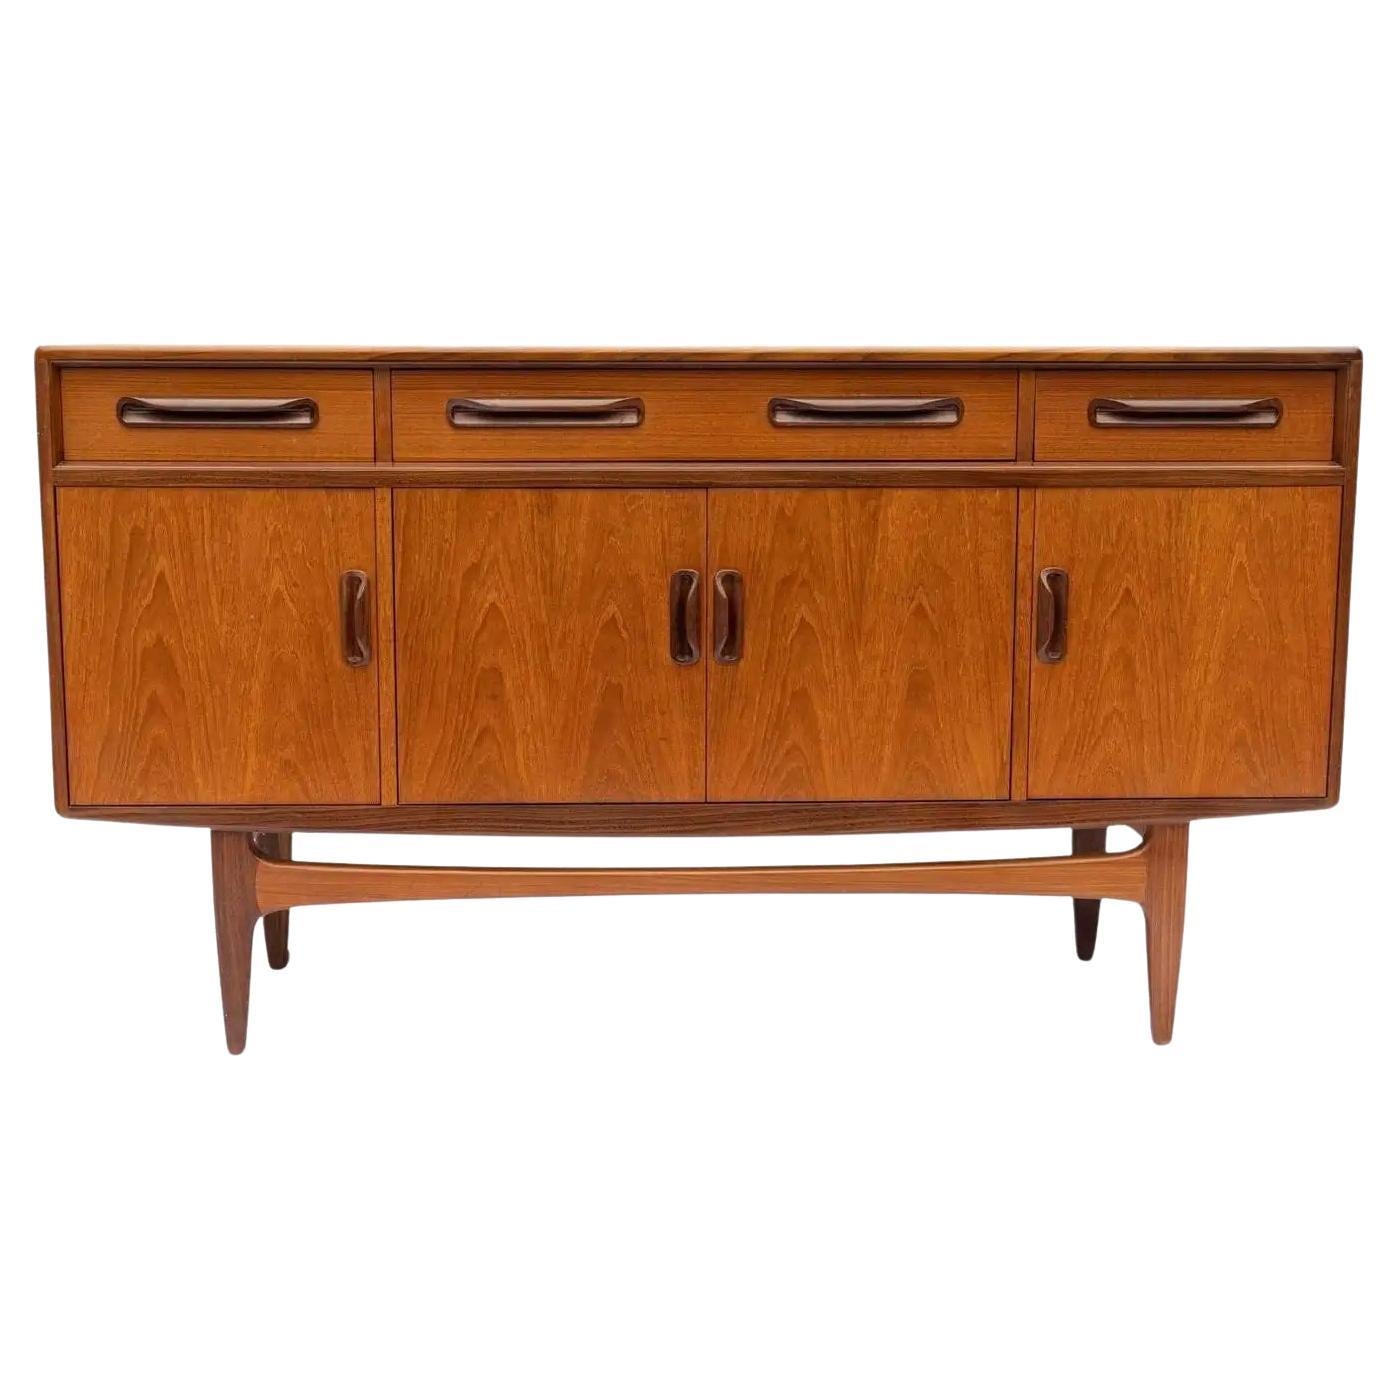 Mid-Century Teak Fresco Sideboard by v. Wilkins for G Plan, English, Ca. 1960 For Sale